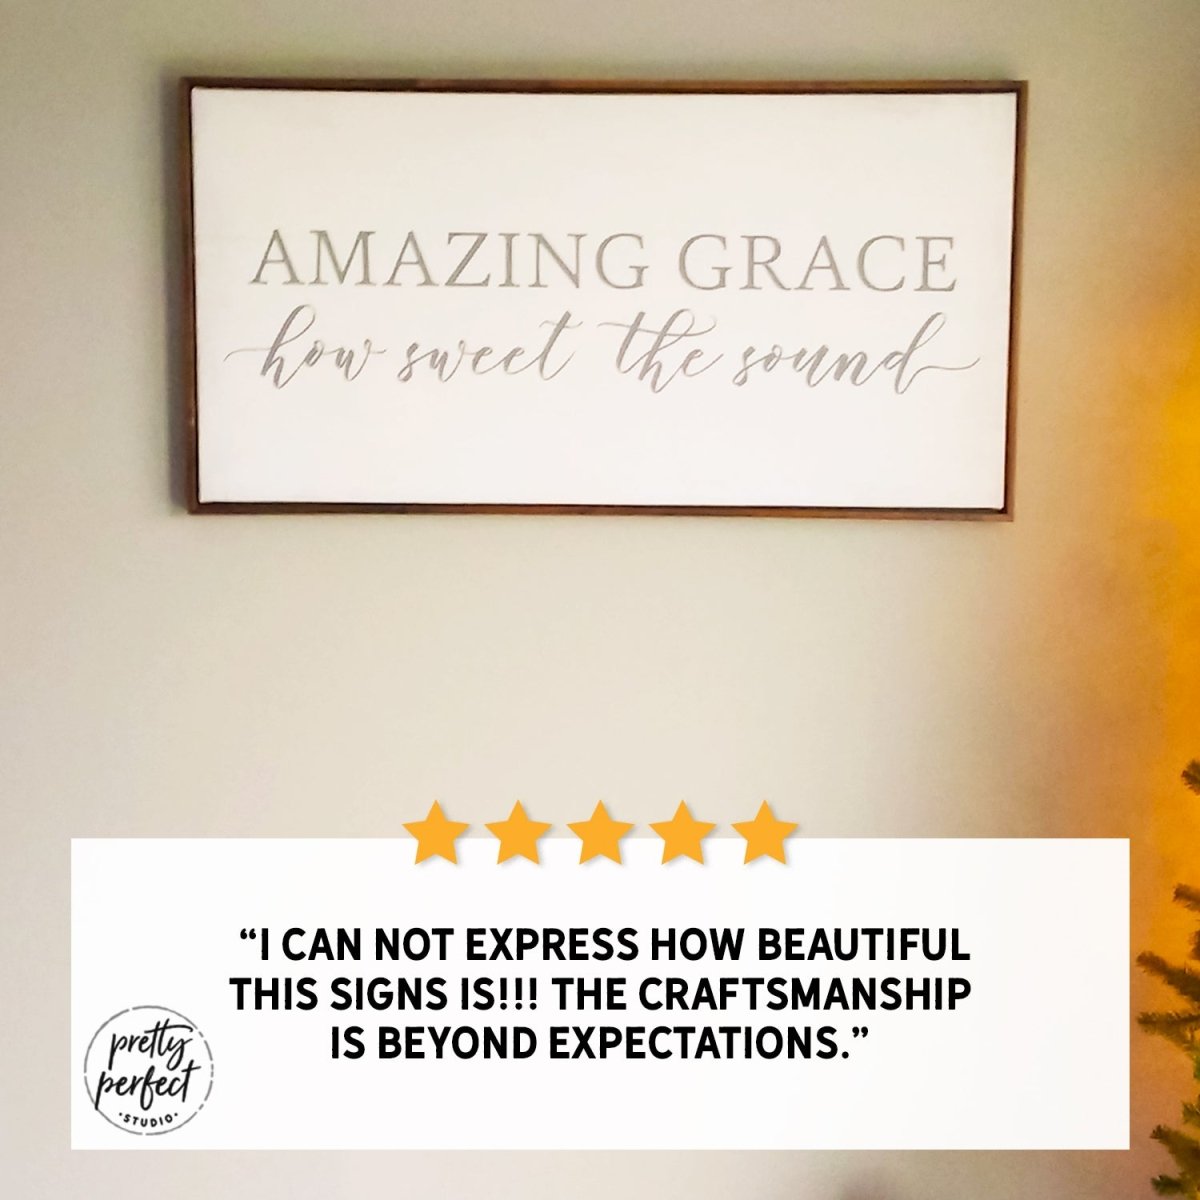 Customer product review for amazing grace sign by Pretty Perfect Studio